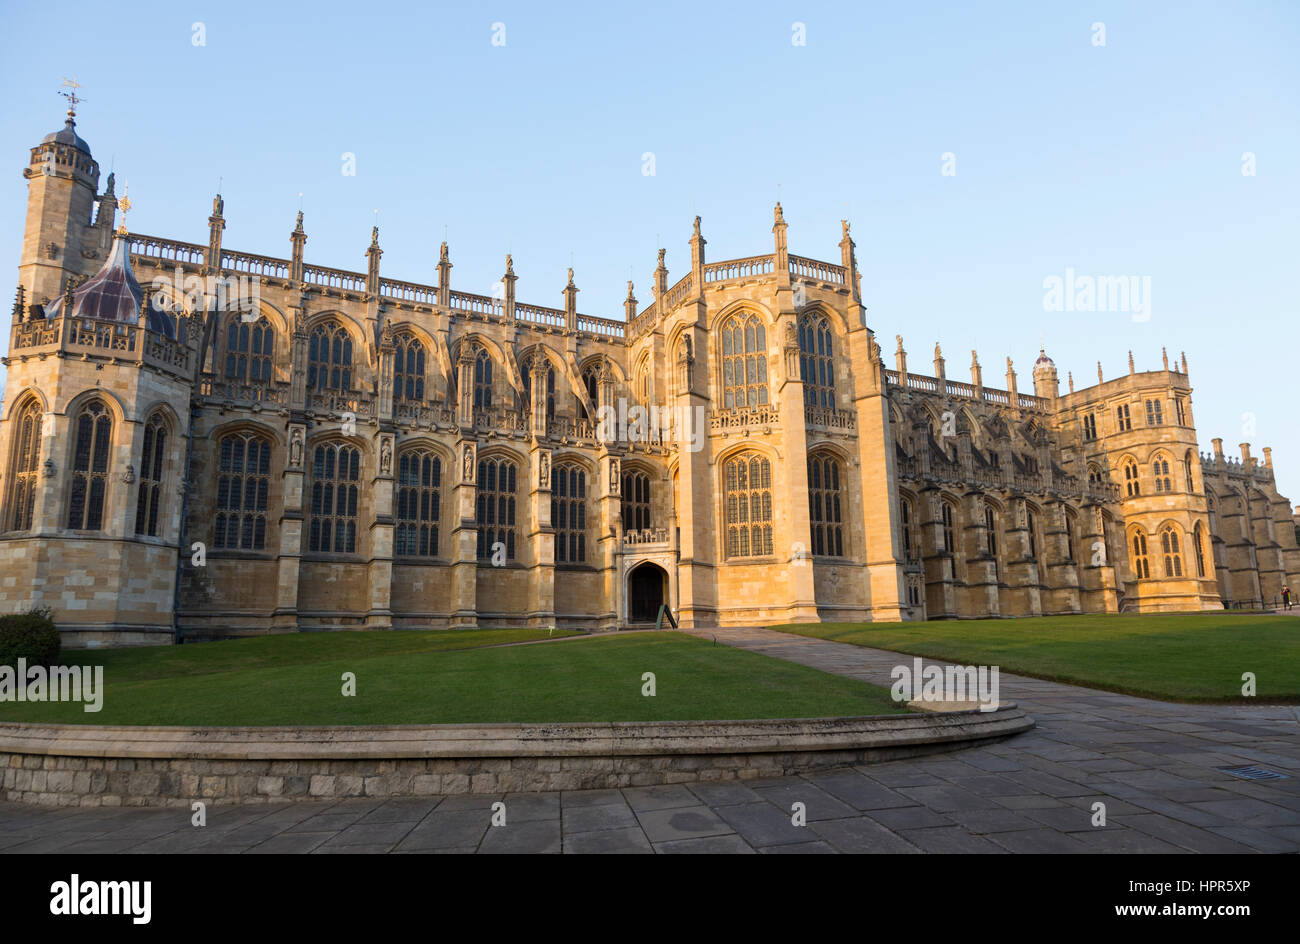 The south facade / southern aspect of Saint George's Chapel, inside Windsor Castle. Windsor, Berkshire. UK. On sunny day with sun & blue sky / skies. Stock Photo